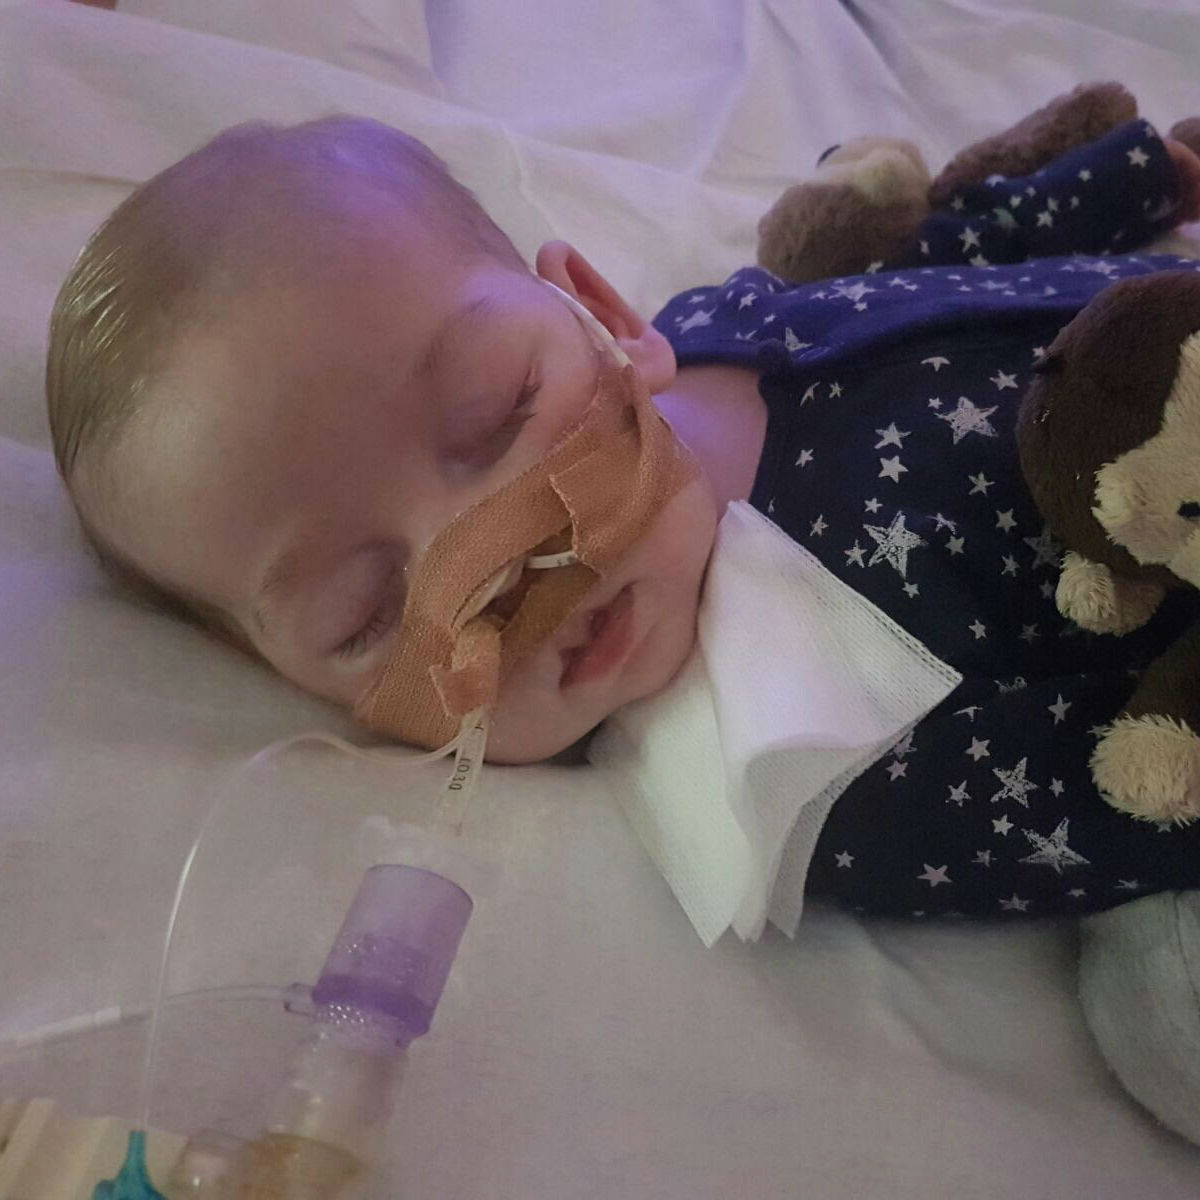 UK bishops offer prayers for terminally-ill baby, Charlie Gard, as parents say life-support will be turned off 